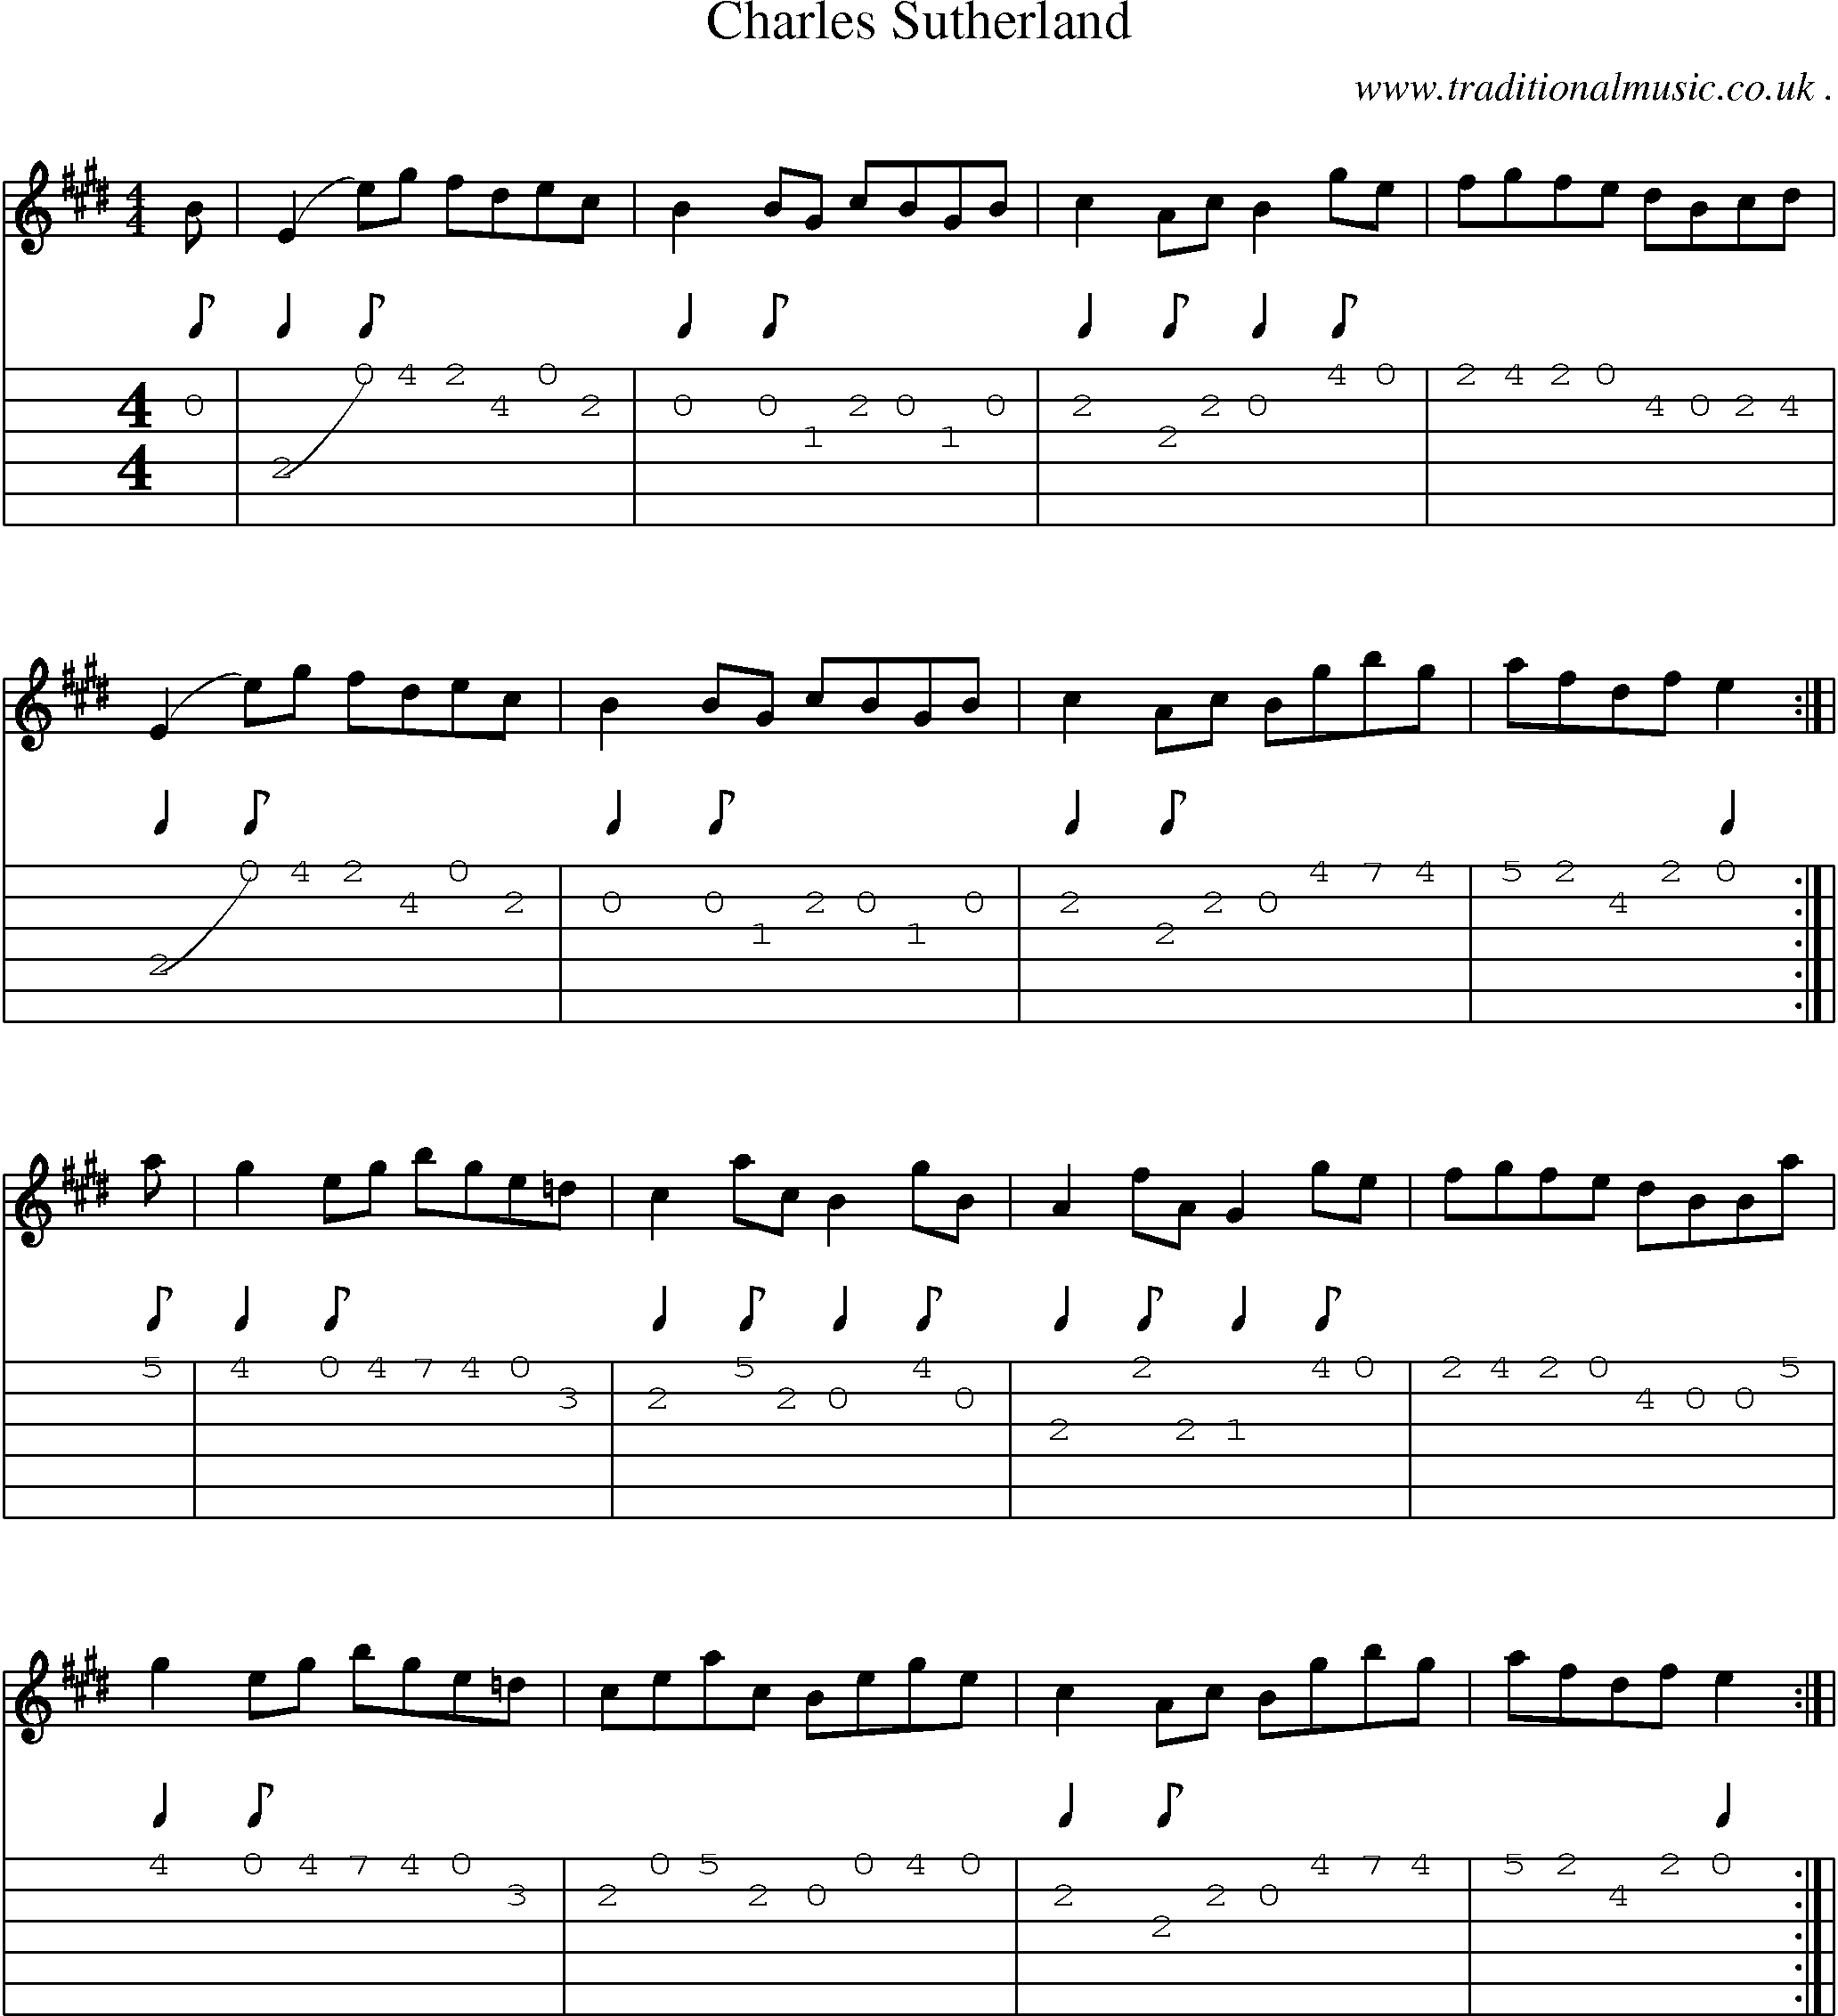 Sheet-Music and Guitar Tabs for Charles Sutherland